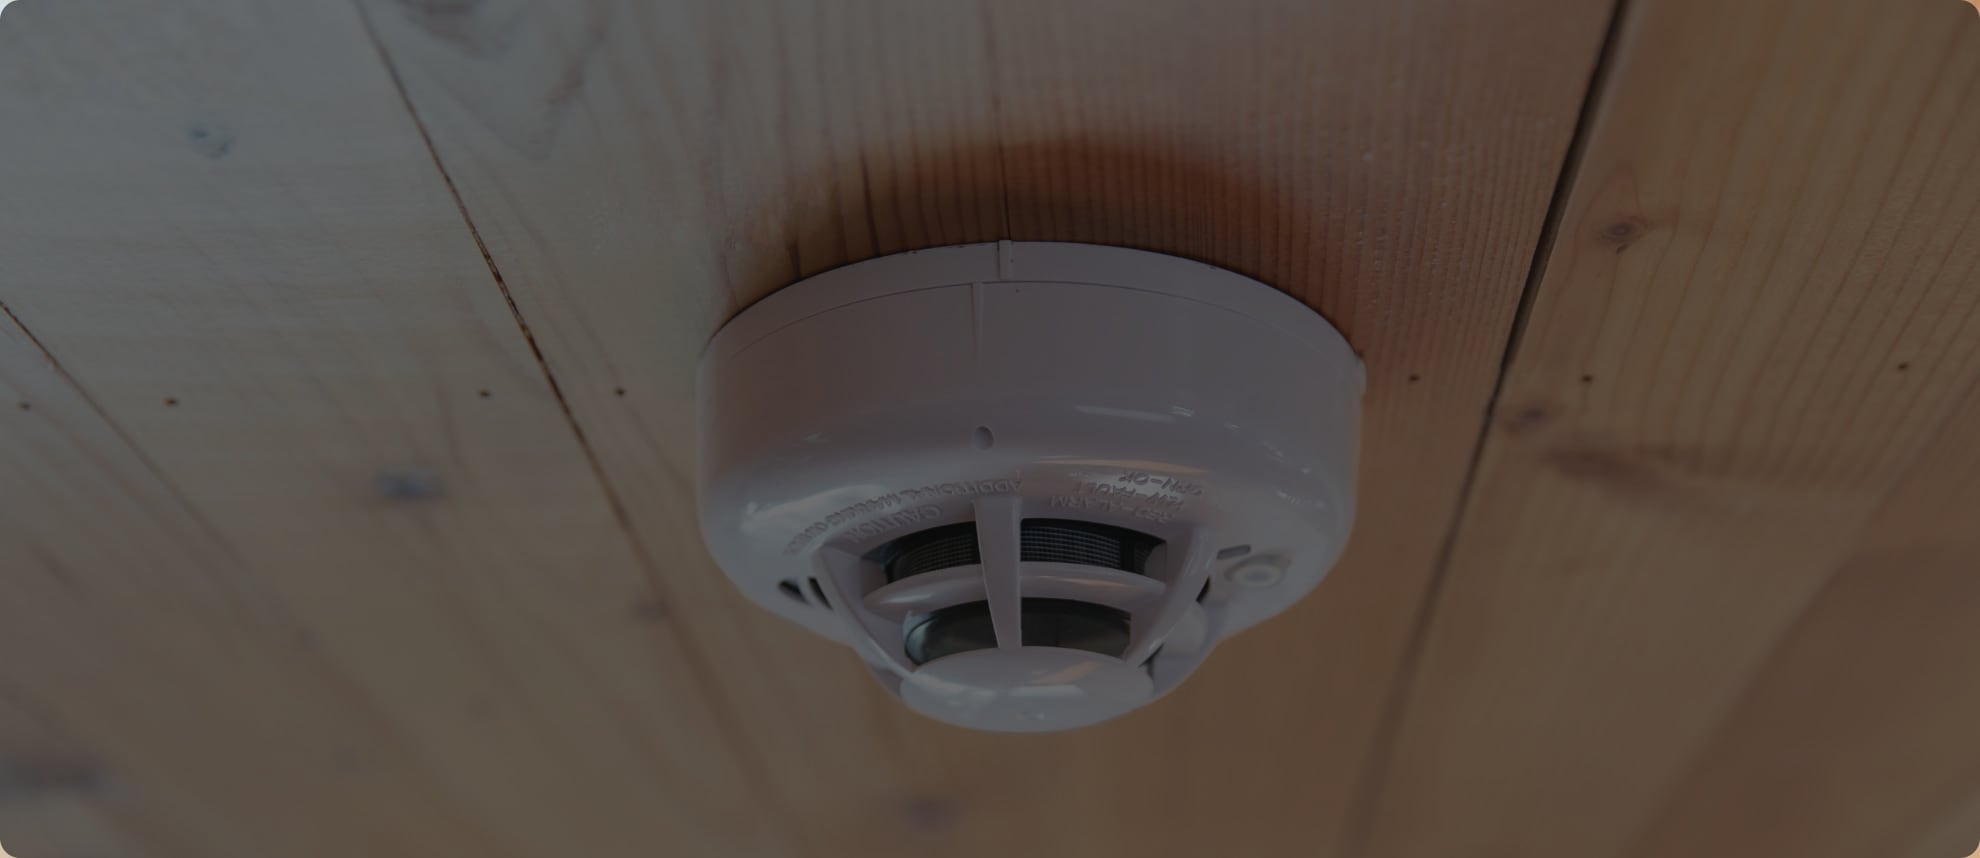 Vivint Monitored Smoke Alarm in Fort Myers